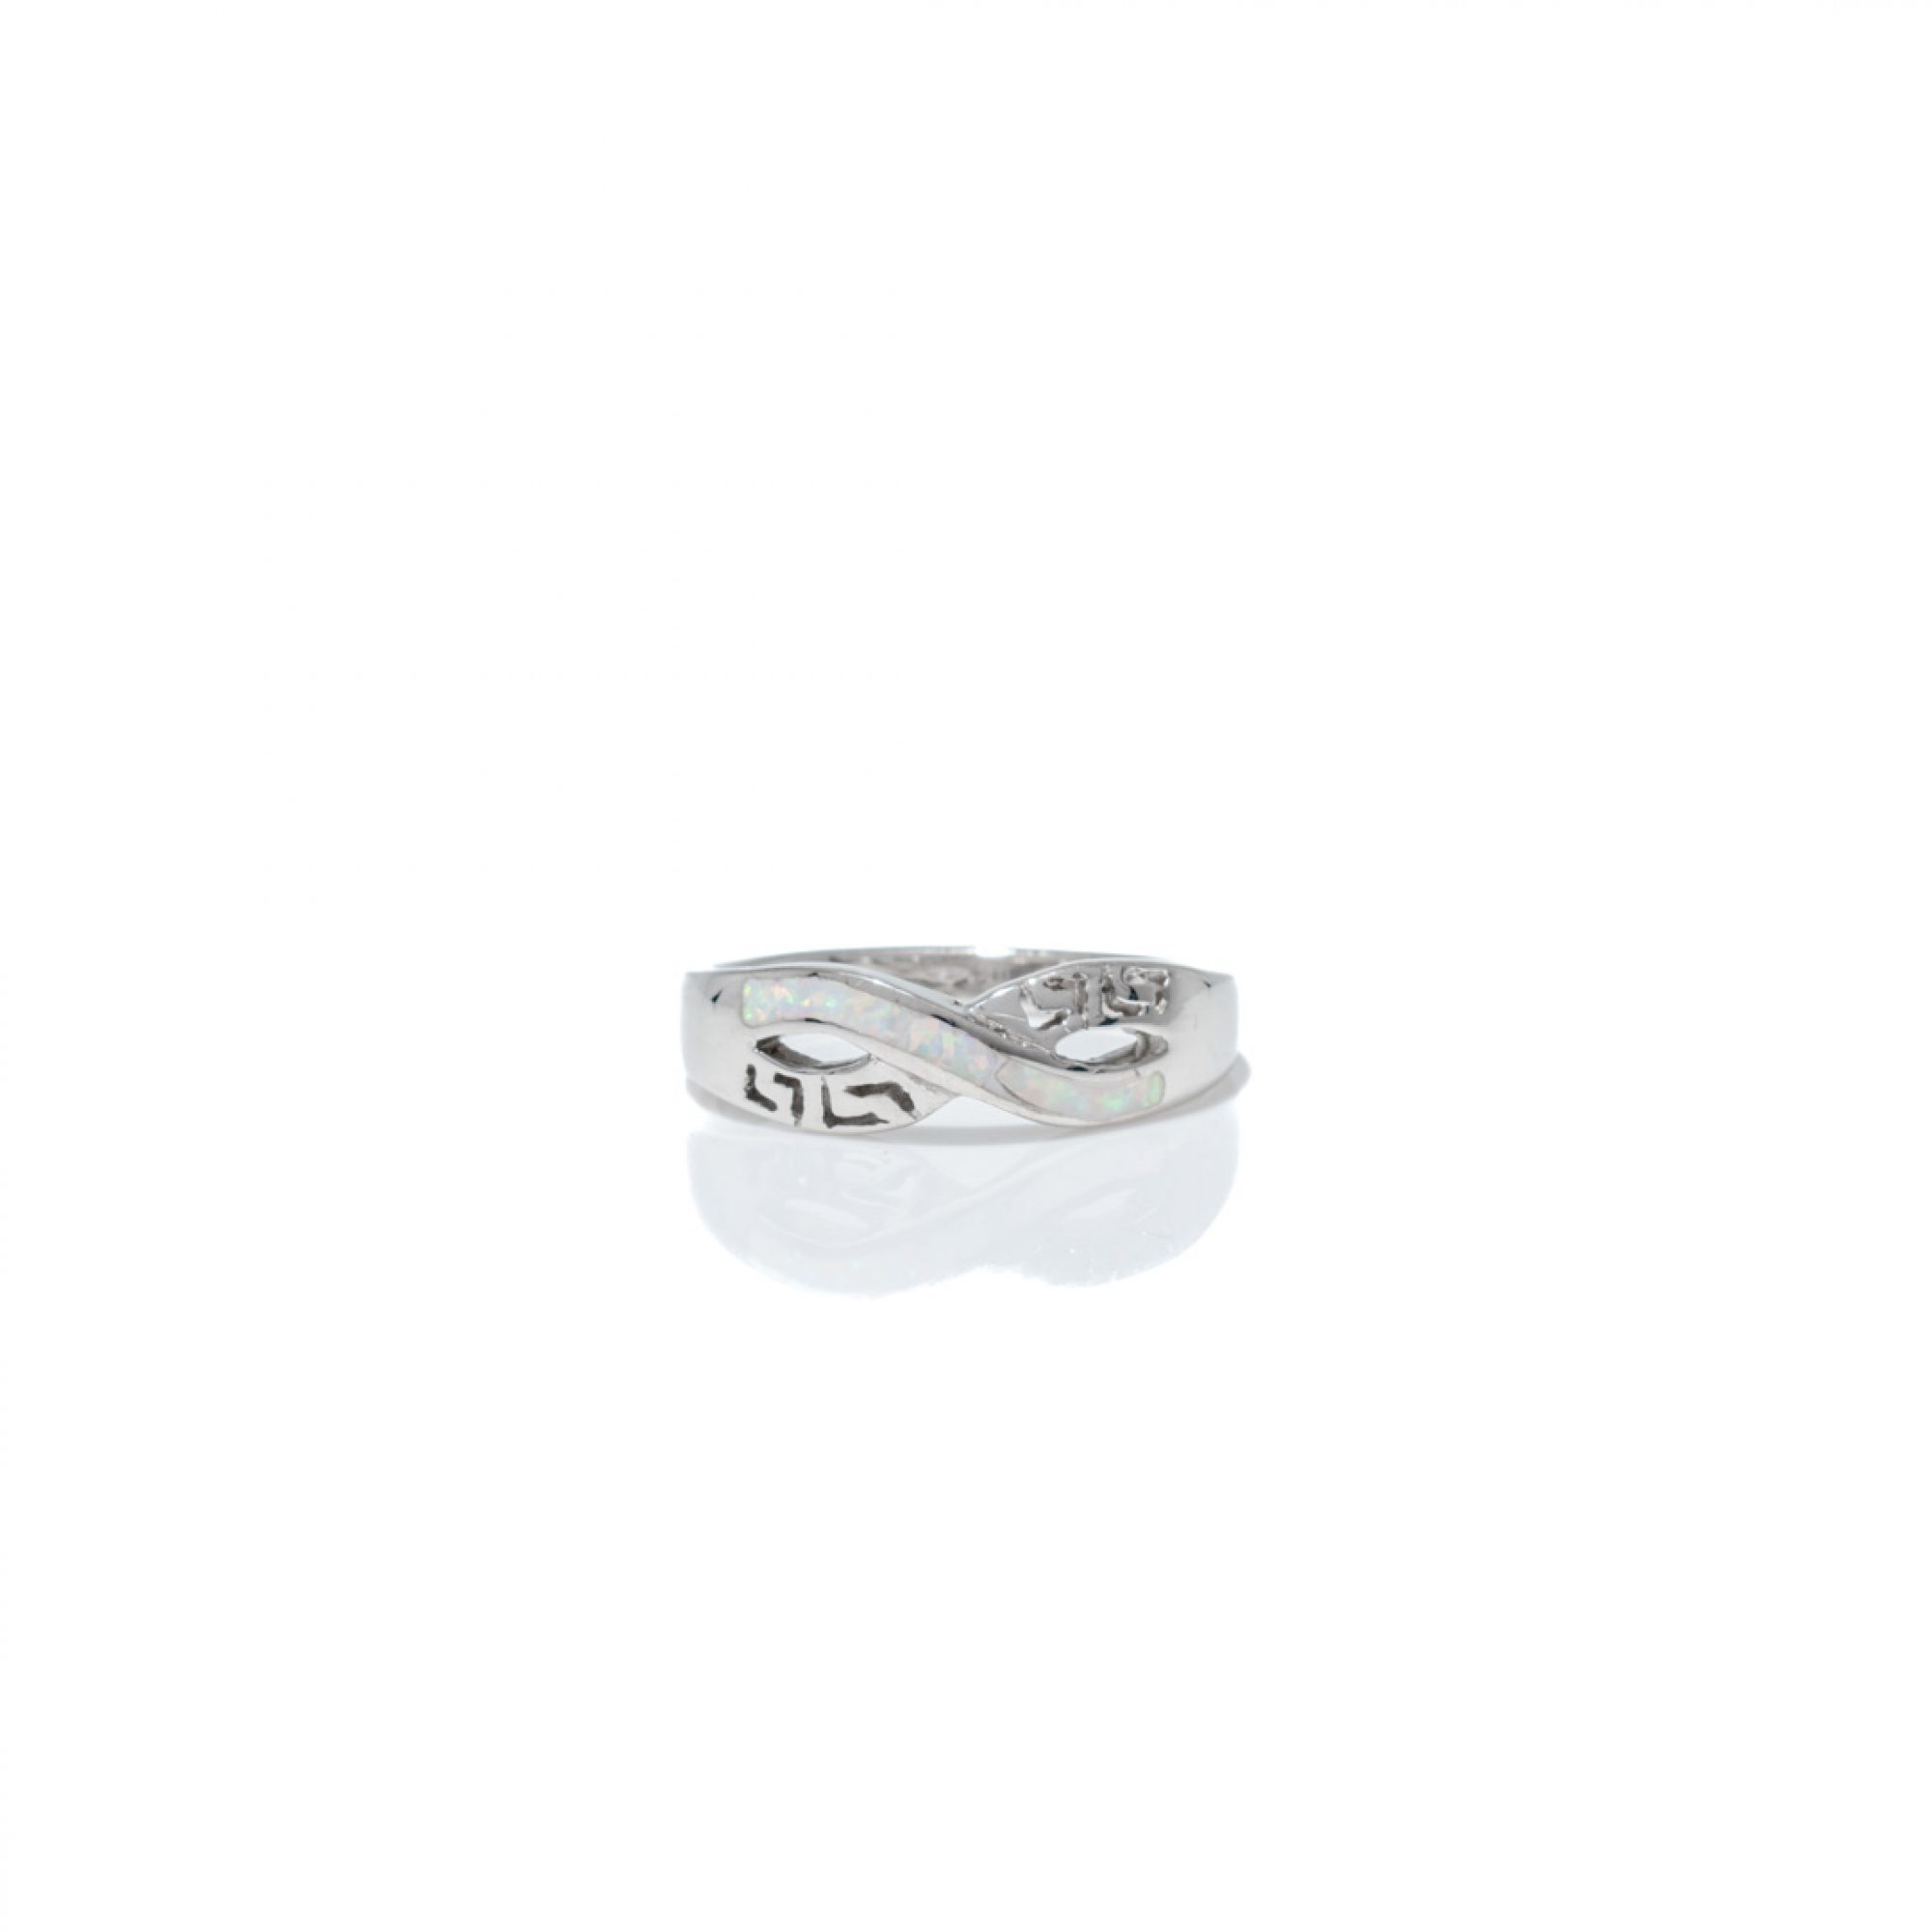 Silver infinity ring with white opal and meander